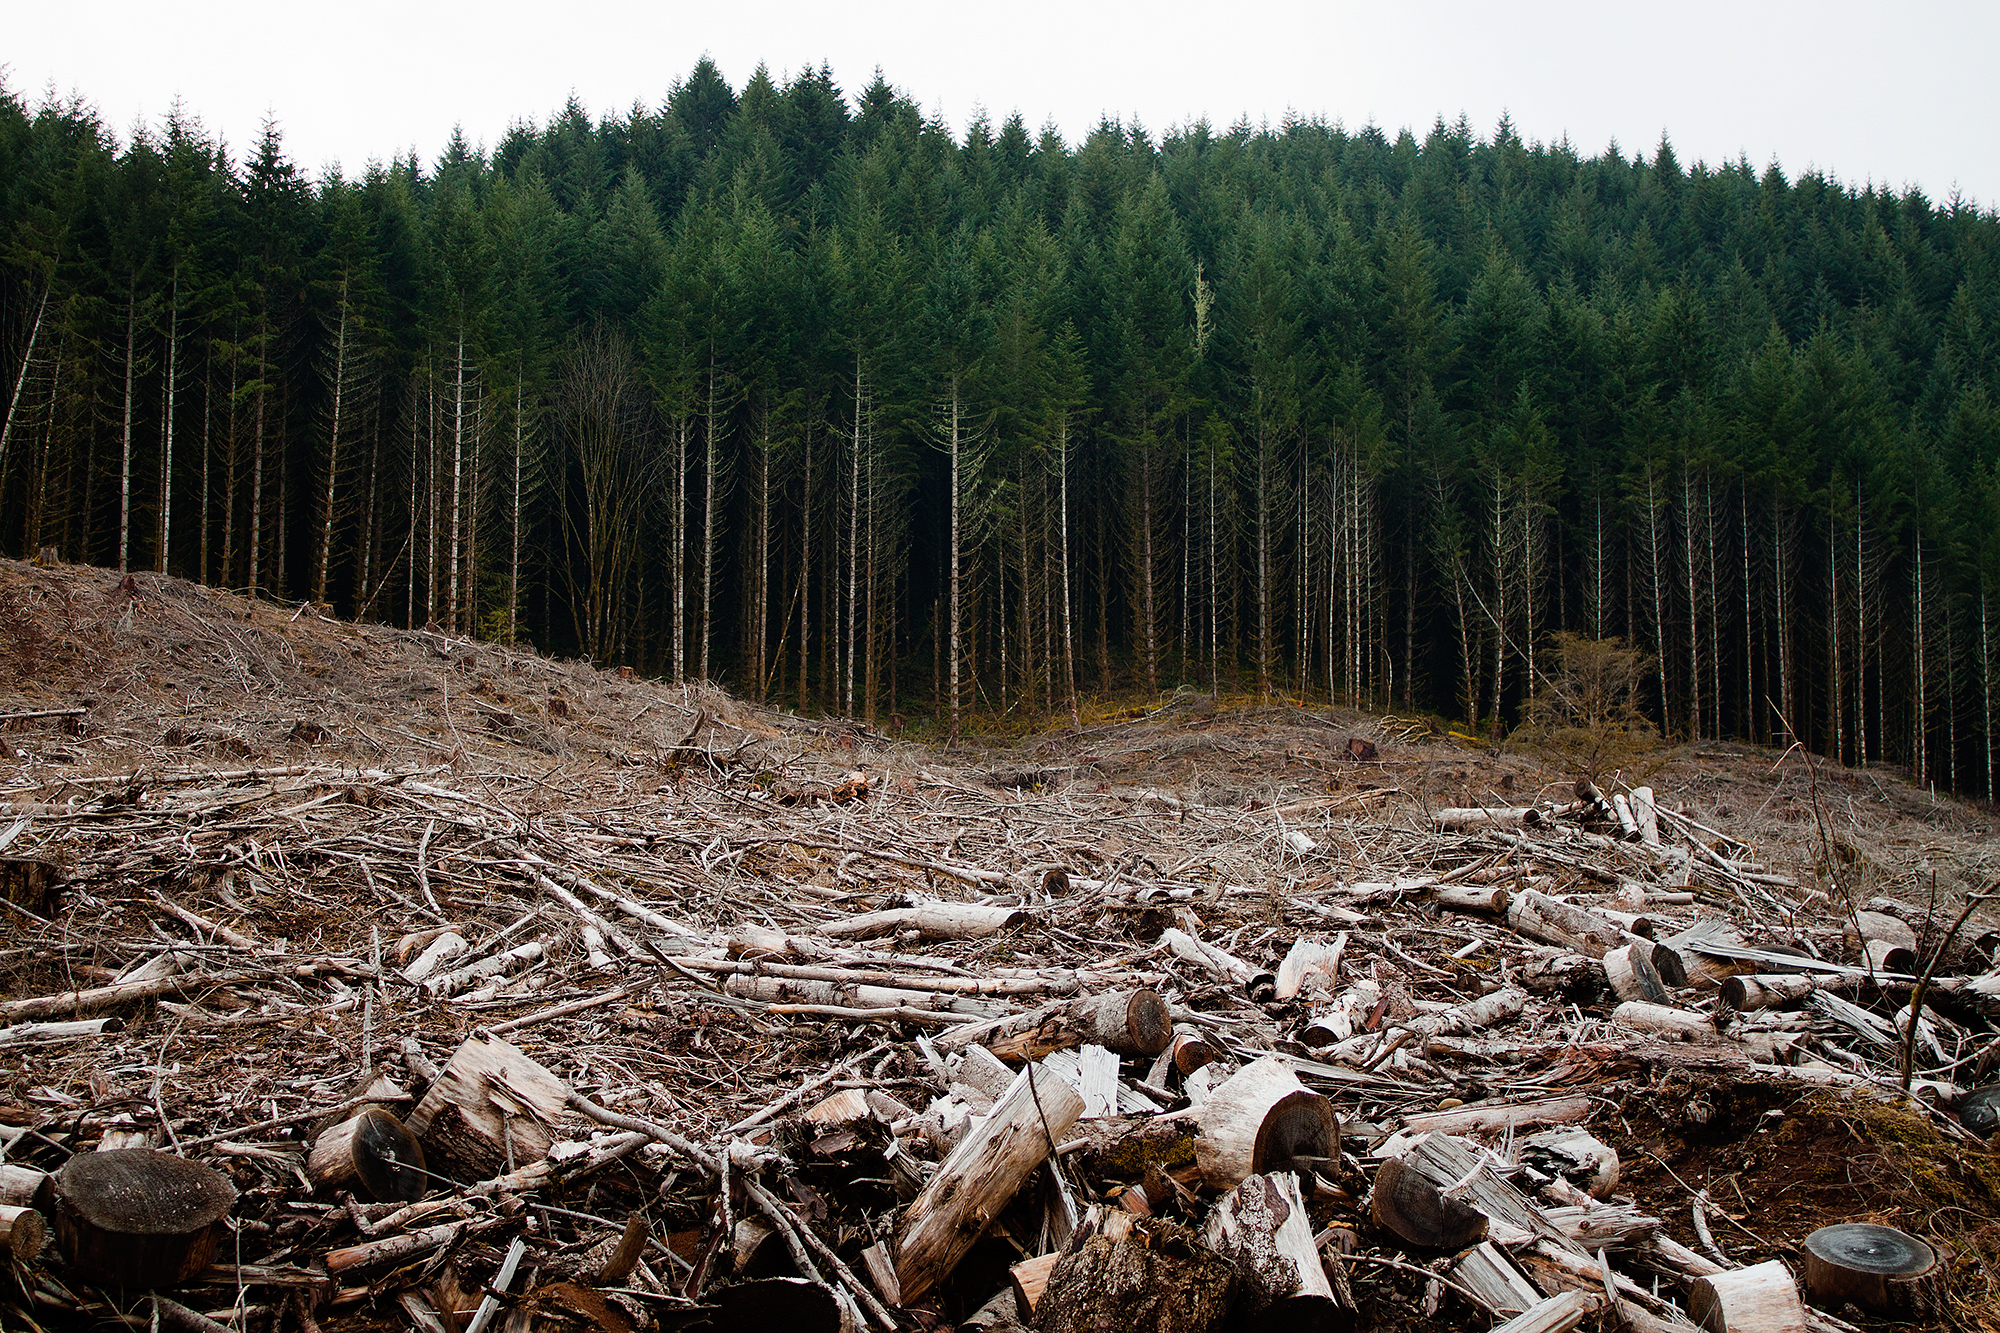 Hundreds of Hectares of Romanian Forest Have Disappeared - VICE